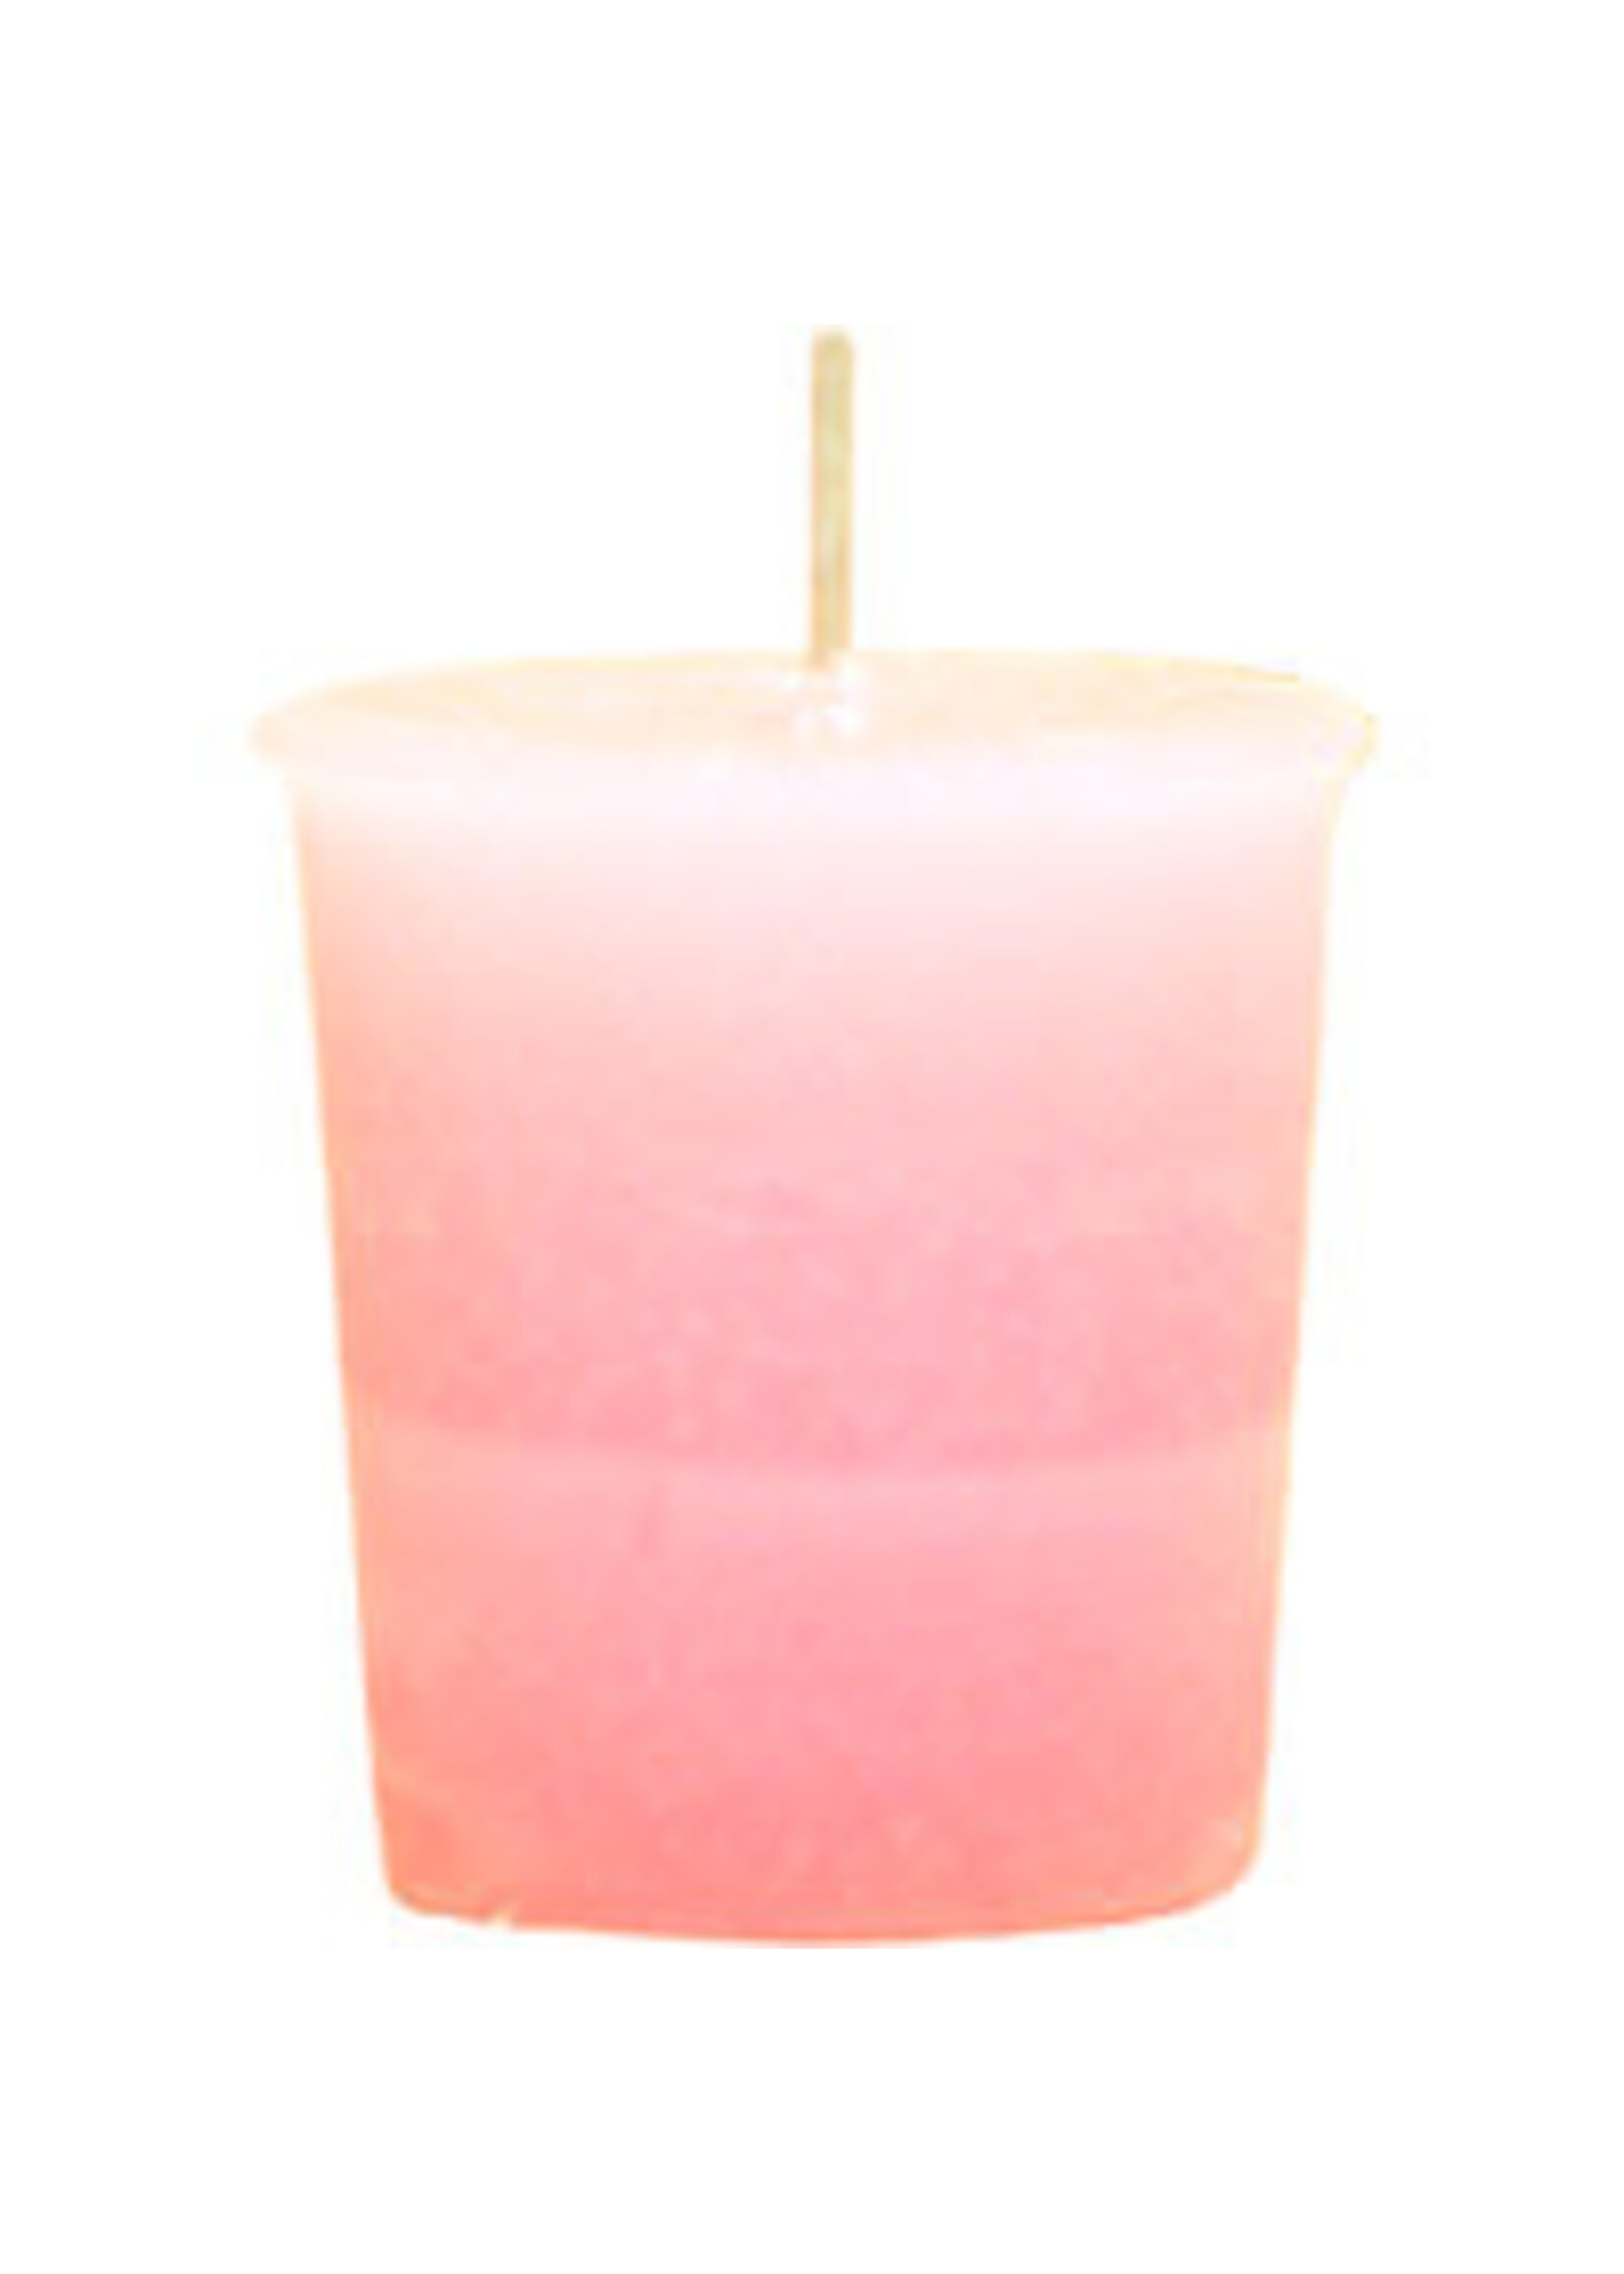 Reiki Charged Herbal Candles Parrafin 2" Votive Candle Friendship